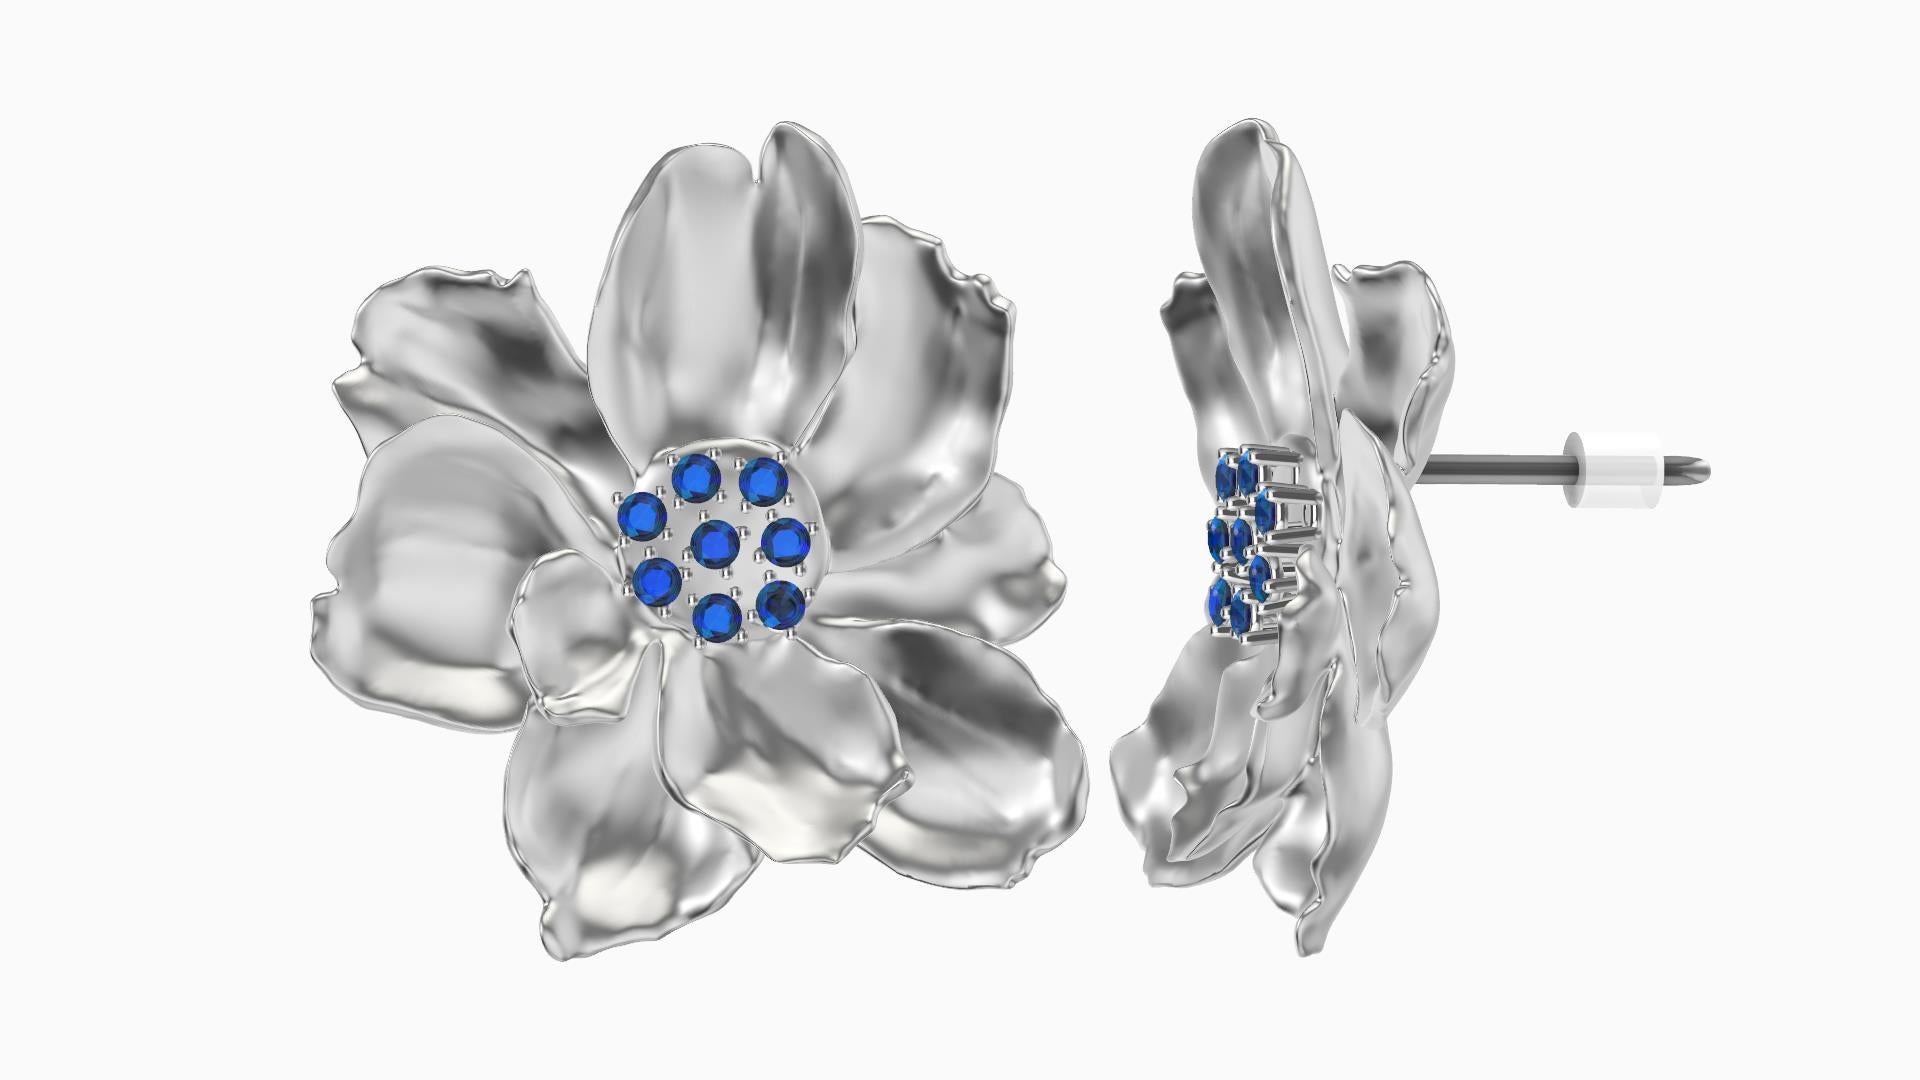 18 Karat White Gold Wild Flower Earrings with Sapphires, Tiffany Designer Thomas Kurilla sculpted these exclusively for 1stdibs. Boredom causes us to challenge ourselves. Working from life especially during the covid  virus could push us two ways .